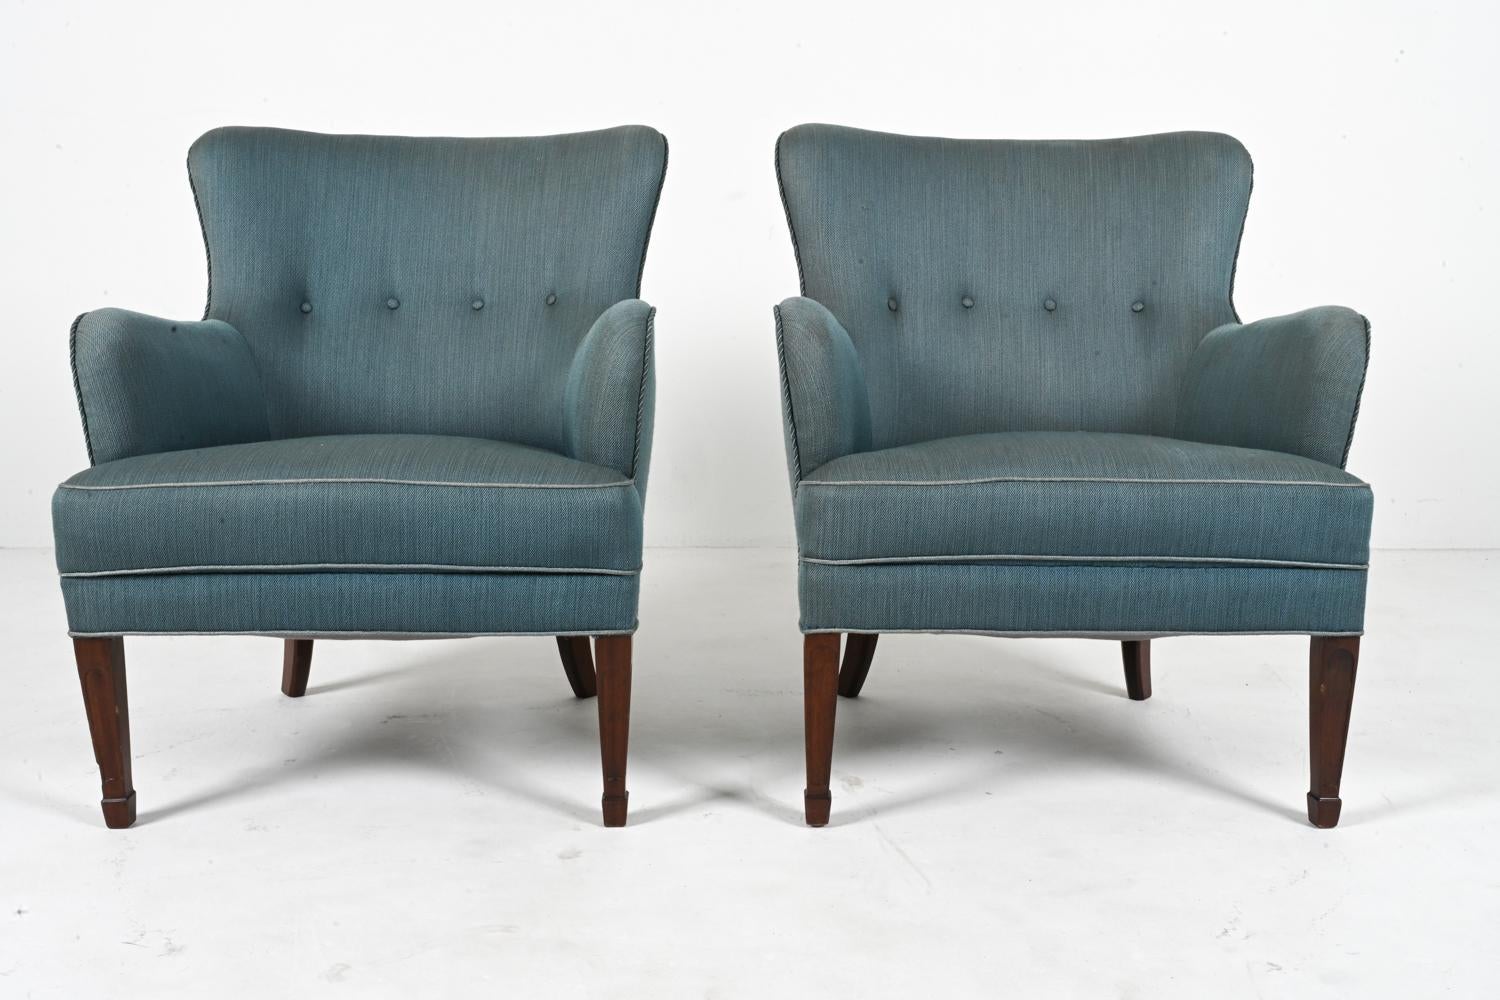 Danish Pair of Frits Henningsen Easy Chairs in Mahogany, c. 1940's For Sale